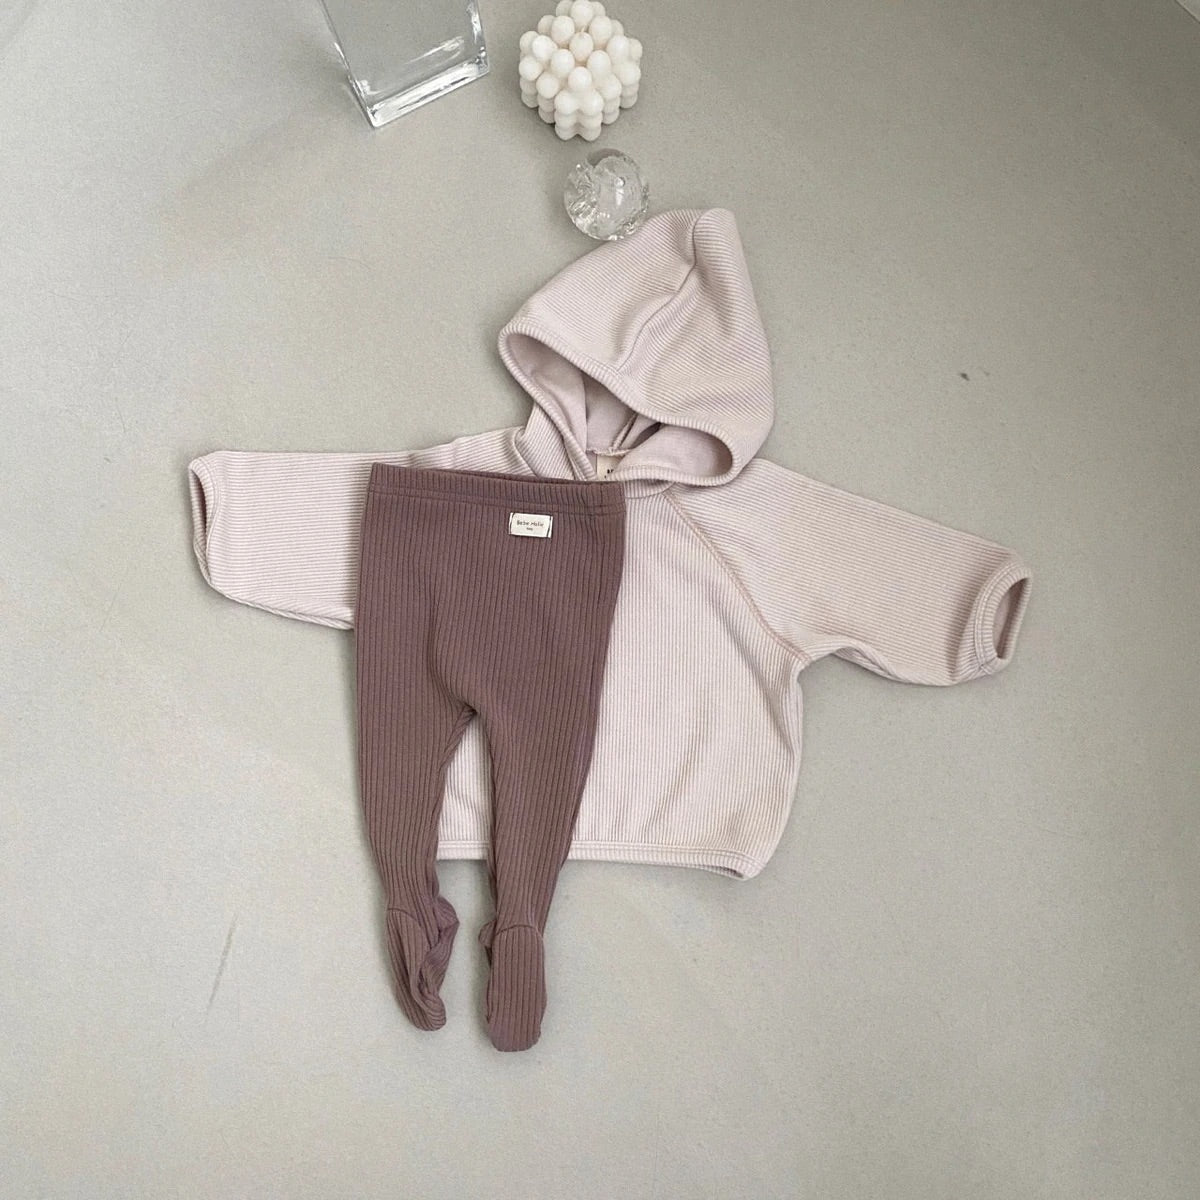 Mini Vera Rib Foot Leggings find Stylish Fashion for Little People- at Little Foxx Concept Store